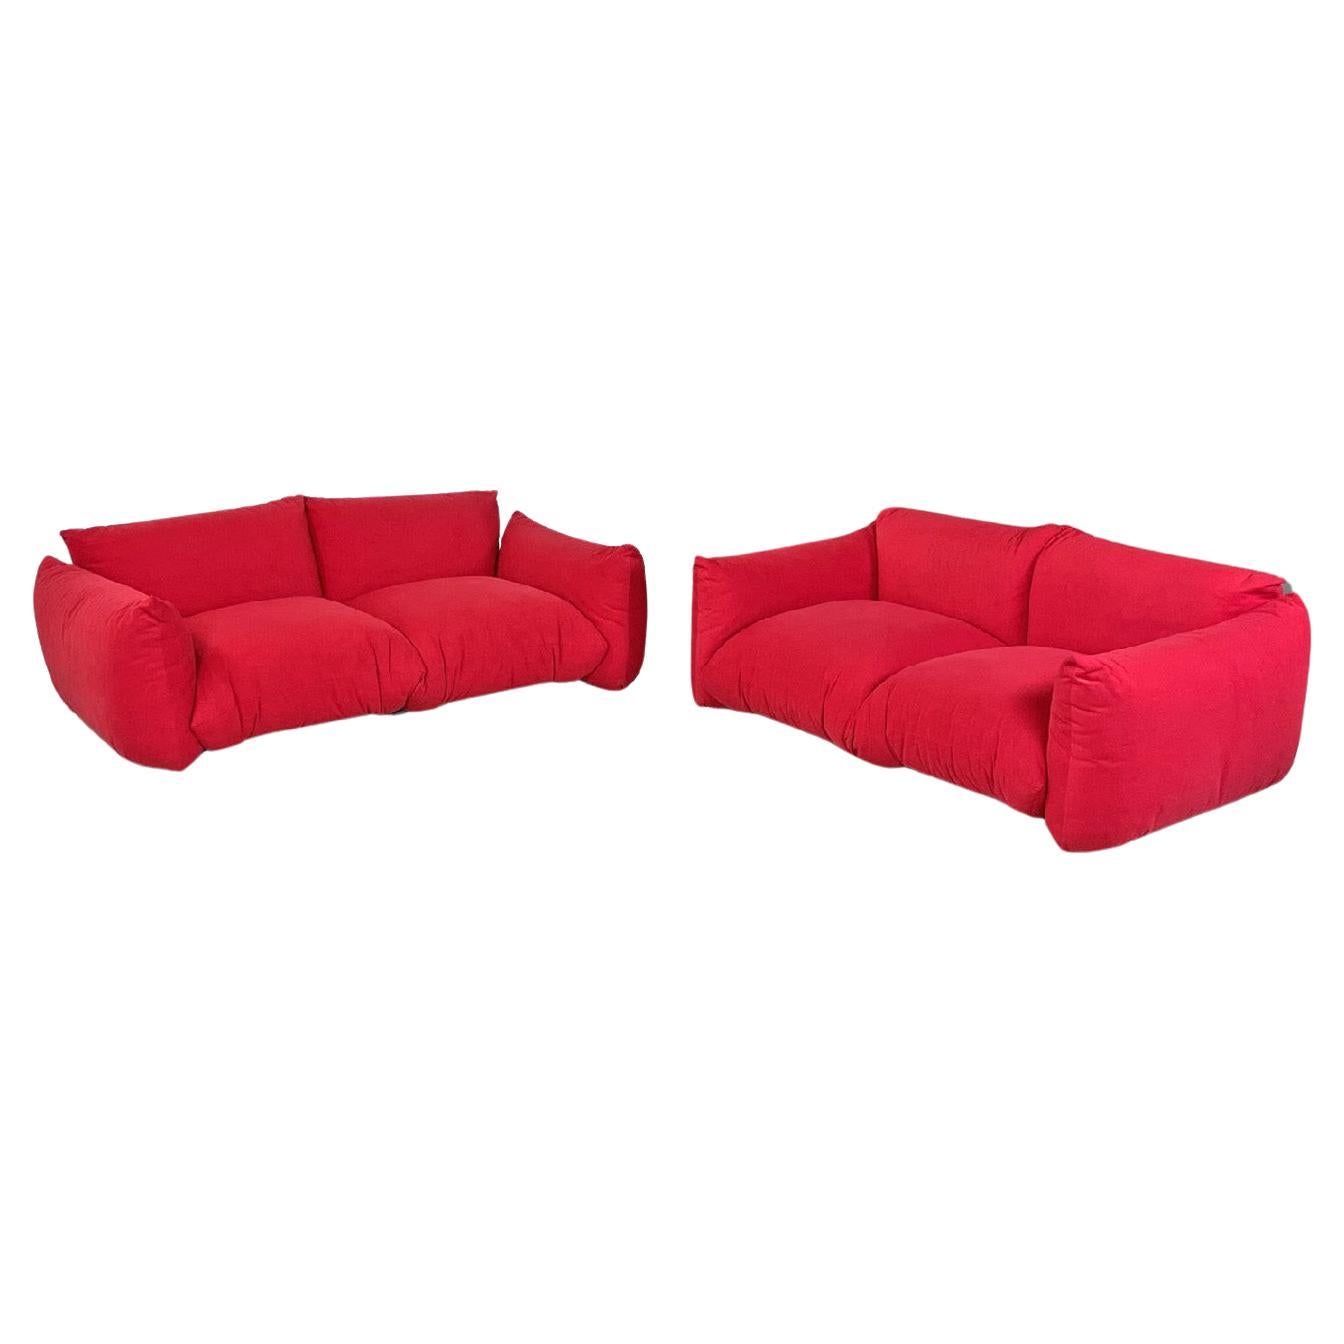 Italian modern red sofas Marenco by Mario Marenco for Arflex, 1970s For Sale